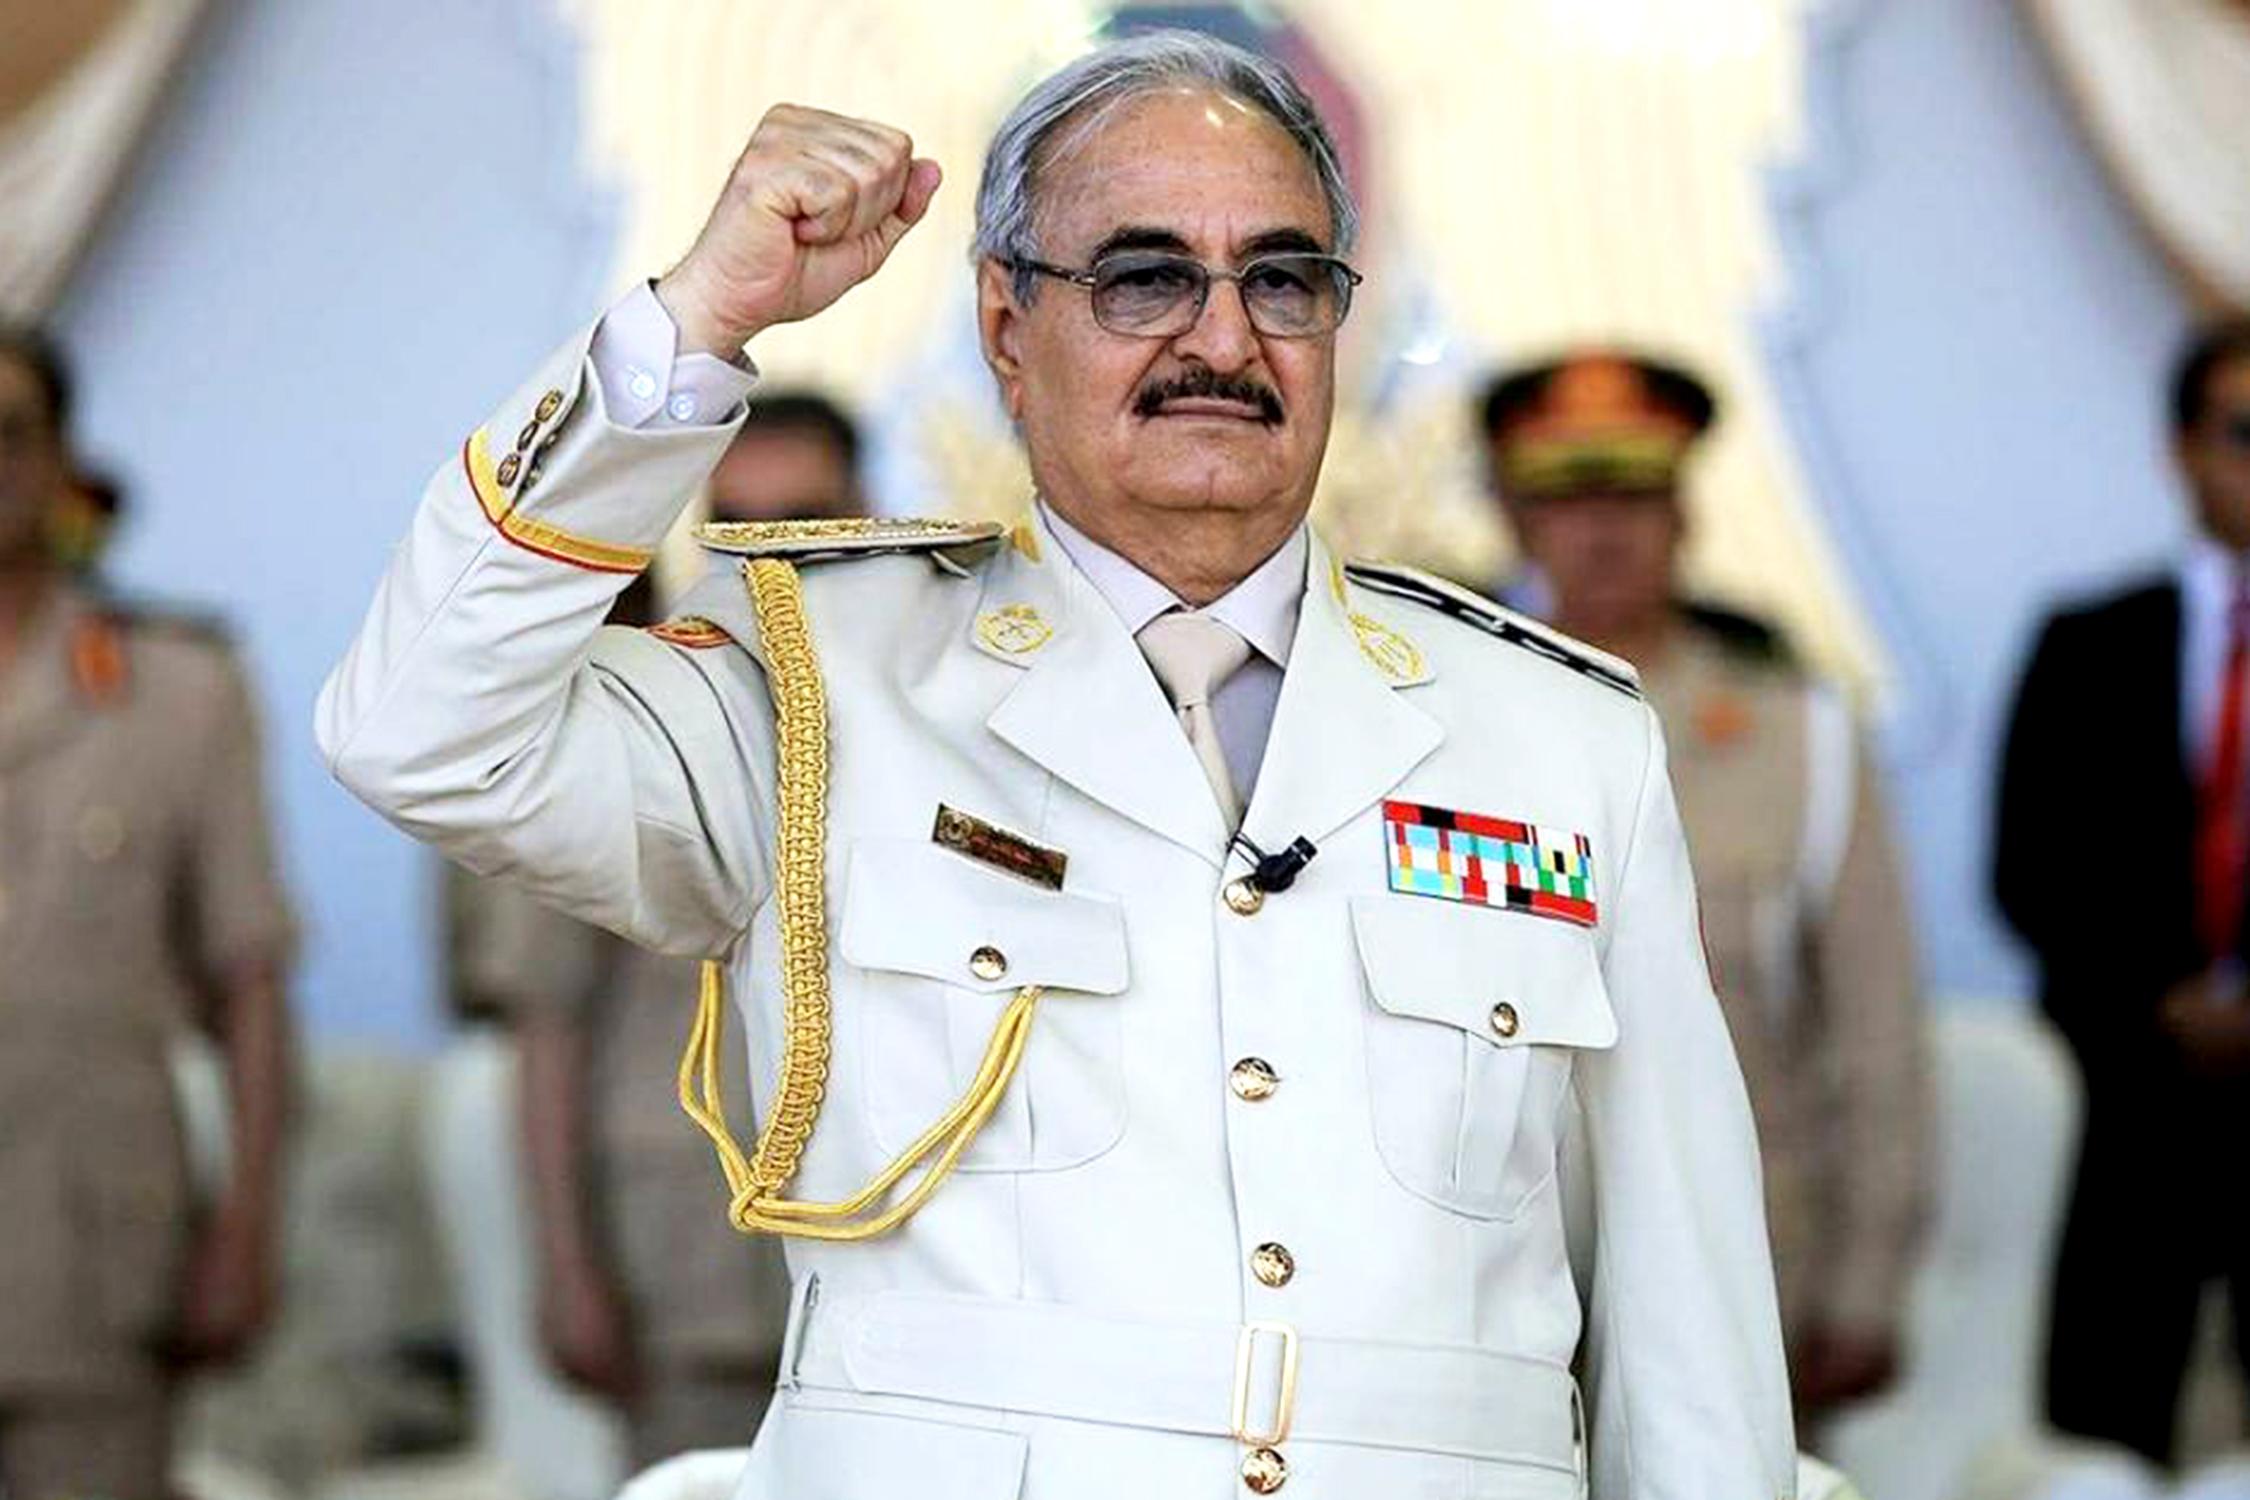 Khalifa Haftar resumes position of Commander in chief of rival Libyan army